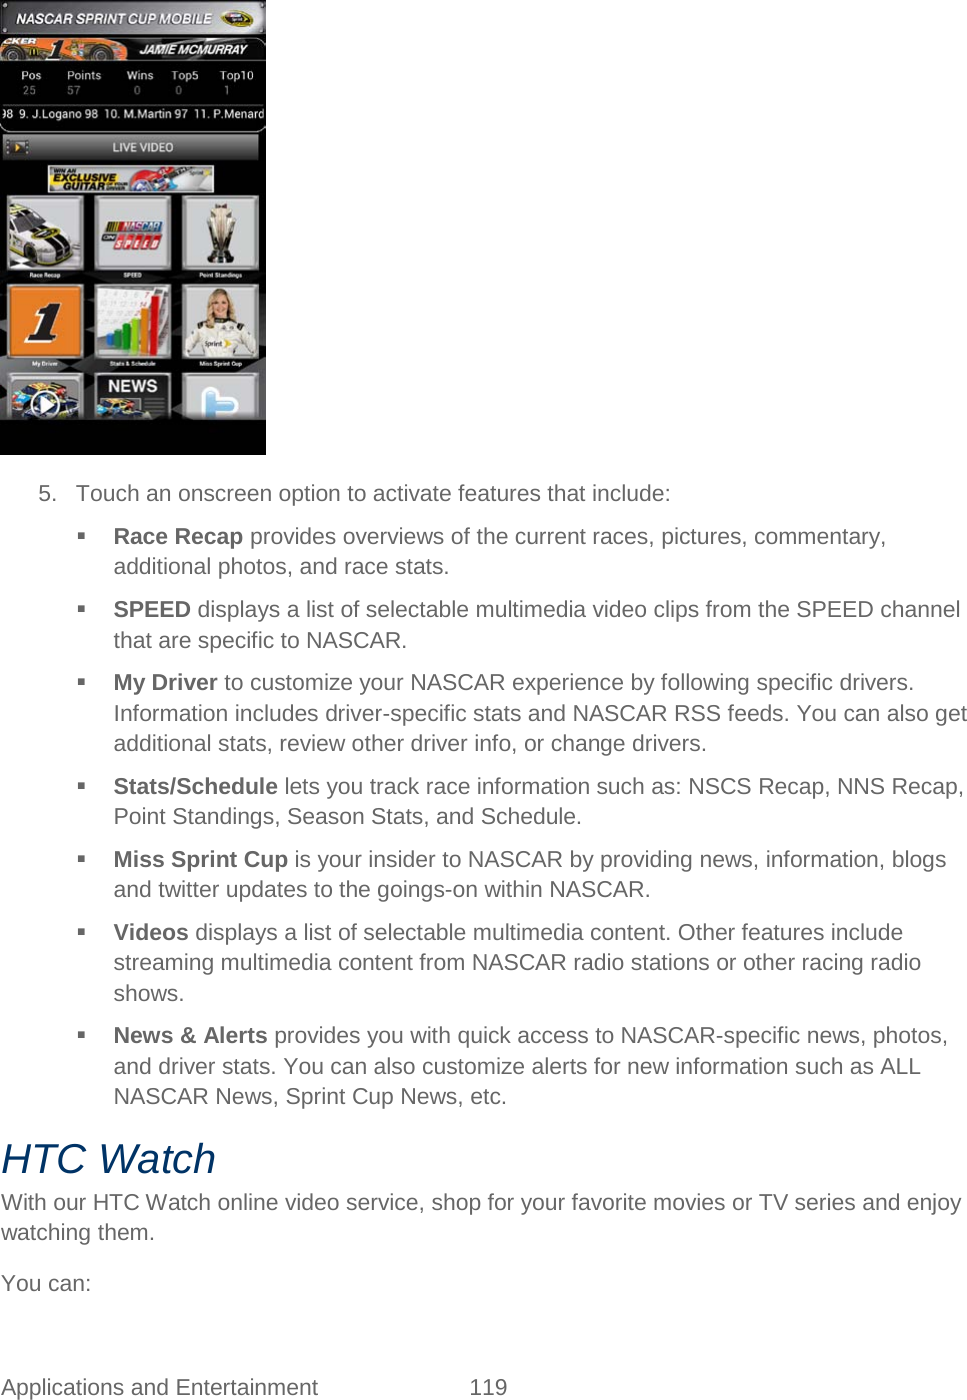  Applications and Entertainment 119    5. Touch an onscreen option to activate features that include:   Race Recap provides overviews of the current races, pictures, commentary, additional photos, and race stats.  SPEED displays a list of selectable multimedia video clips from the SPEED channel that are specific to NASCAR.  My Driver to customize your NASCAR experience by following specific drivers. Information includes driver-specific stats and NASCAR RSS feeds. You can also get additional stats, review other driver info, or change drivers.  Stats/Schedule lets you track race information such as: NSCS Recap, NNS Recap, Point Standings, Season Stats, and Schedule.  Miss Sprint Cup is your insider to NASCAR by providing news, information, blogs and twitter updates to the goings-on within NASCAR.  Videos displays a list of selectable multimedia content. Other features include streaming multimedia content from NASCAR radio stations or other racing radio shows.  News &amp; Alerts provides you with quick access to NASCAR-specific news, photos, and driver stats. You can also customize alerts for new information such as ALL NASCAR News, Sprint Cup News, etc. HTC Watch With our HTC Watch online video service, shop for your favorite movies or TV series and enjoy watching them. You can: 